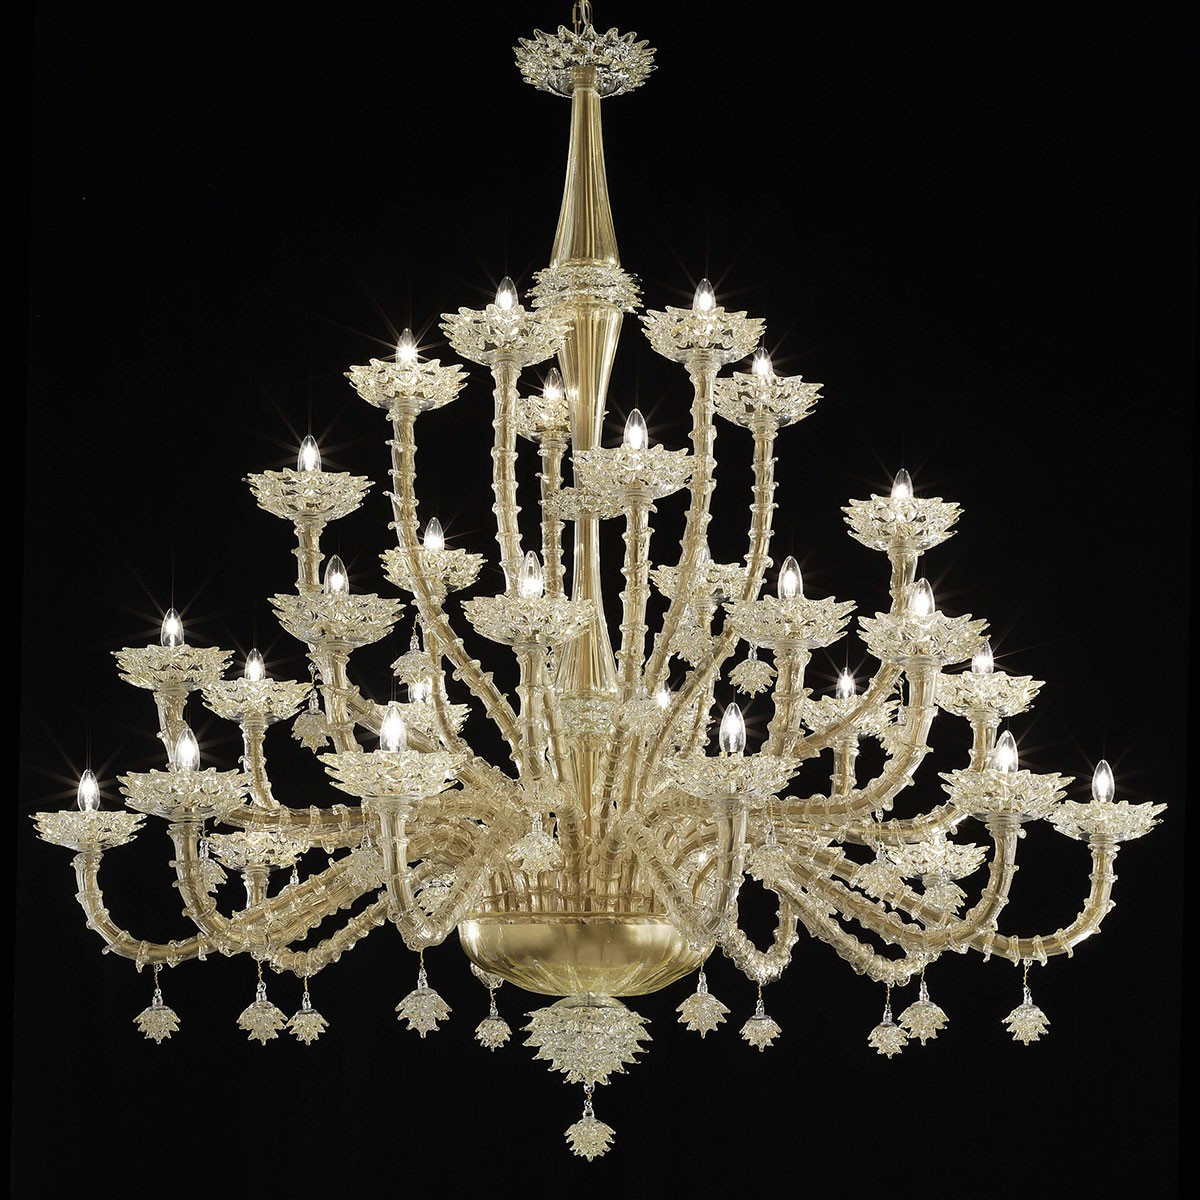 "Scintilla" Murano glass chandelier - 30 lights, transparent with gold trimmings